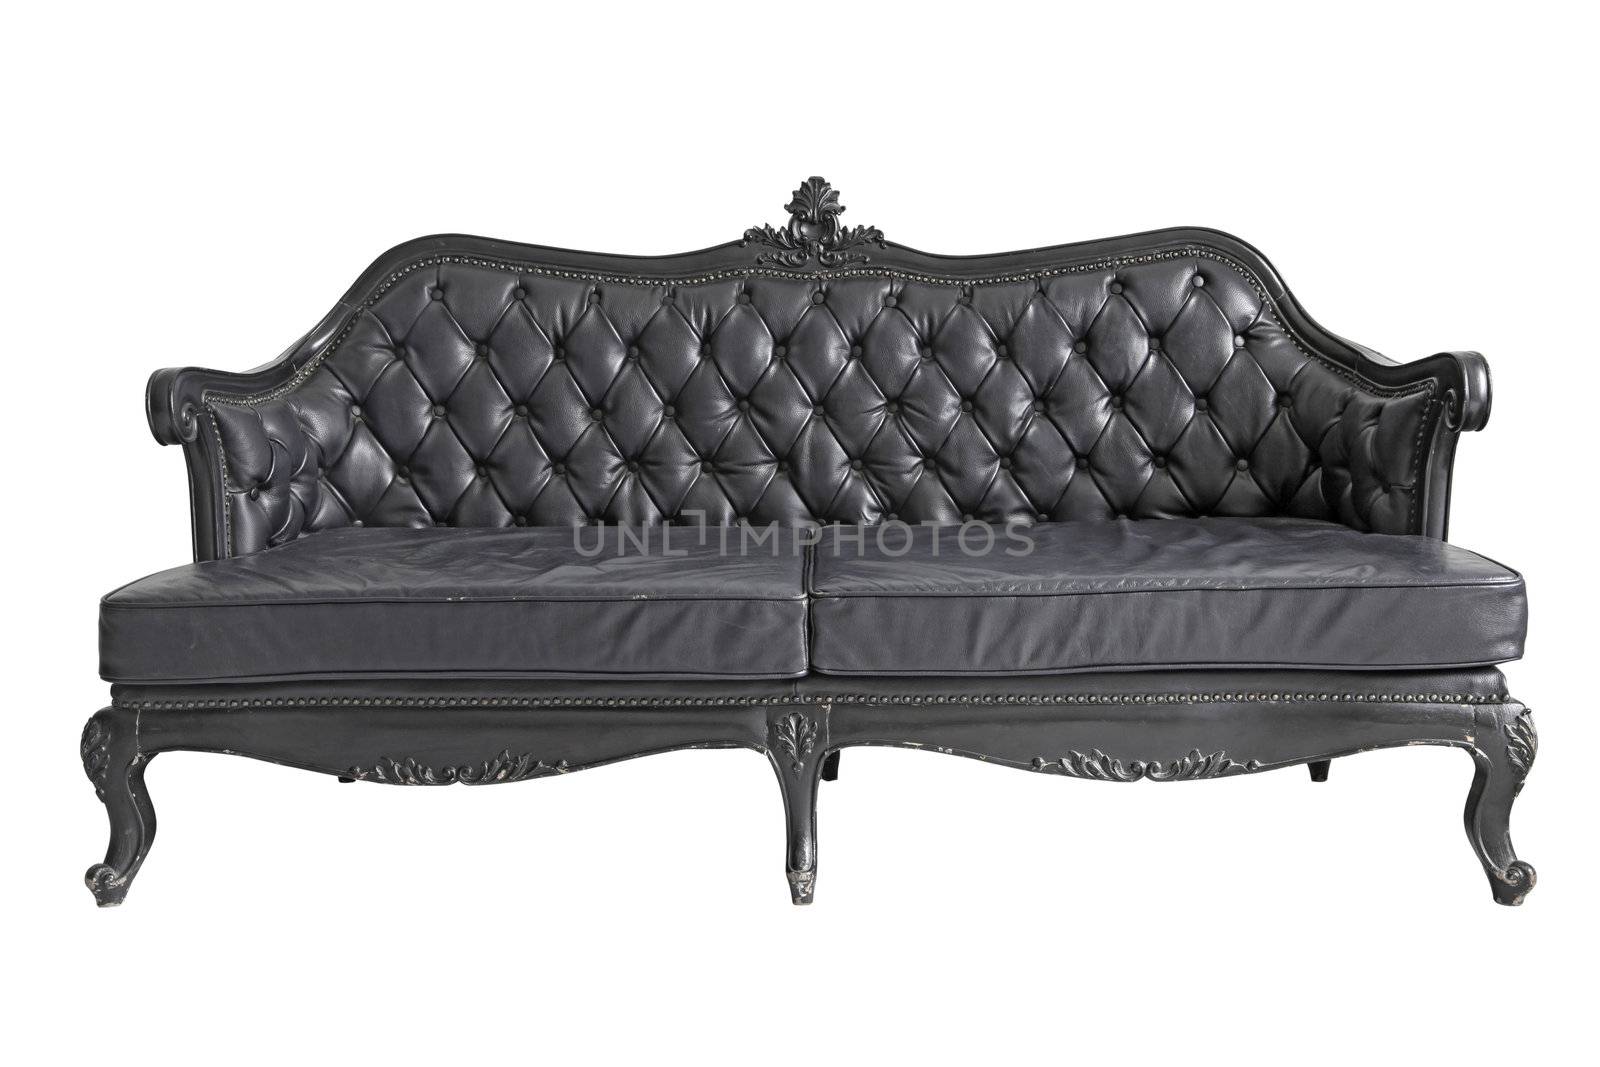 black leather sofa by vichie81